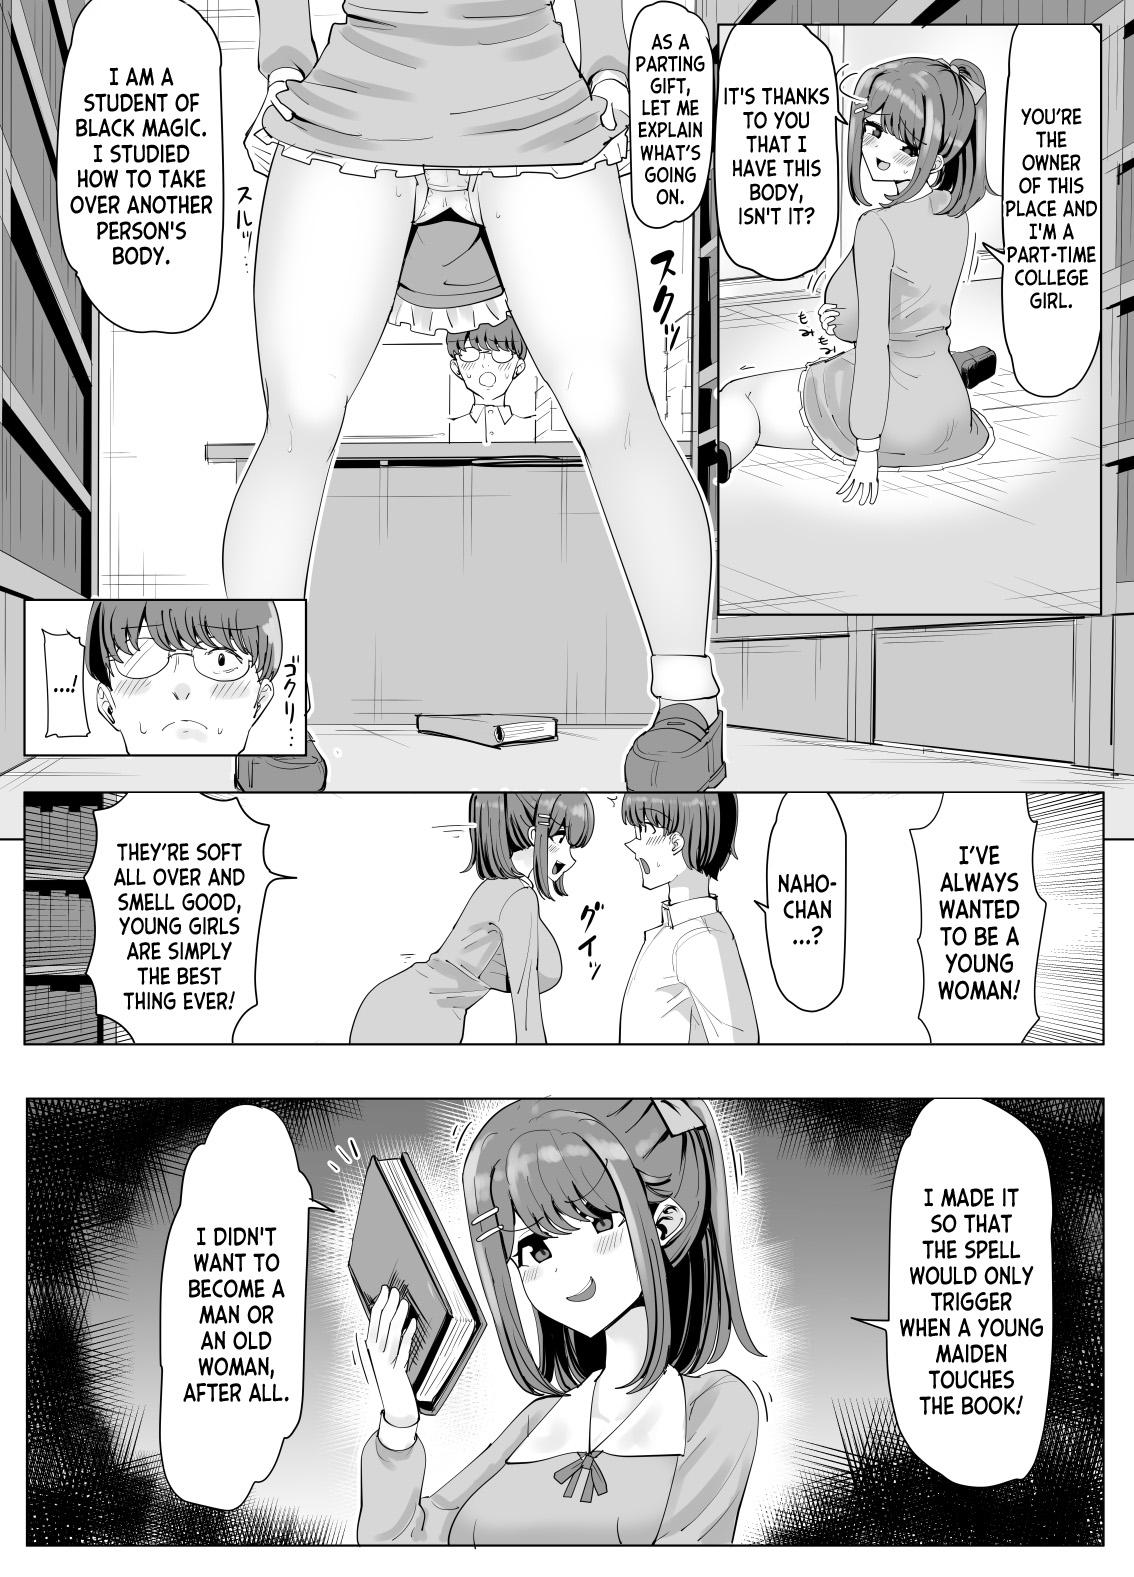 Office College Girl Taken Over by an Old Man 1+2 - Original Pakistani - Page 5